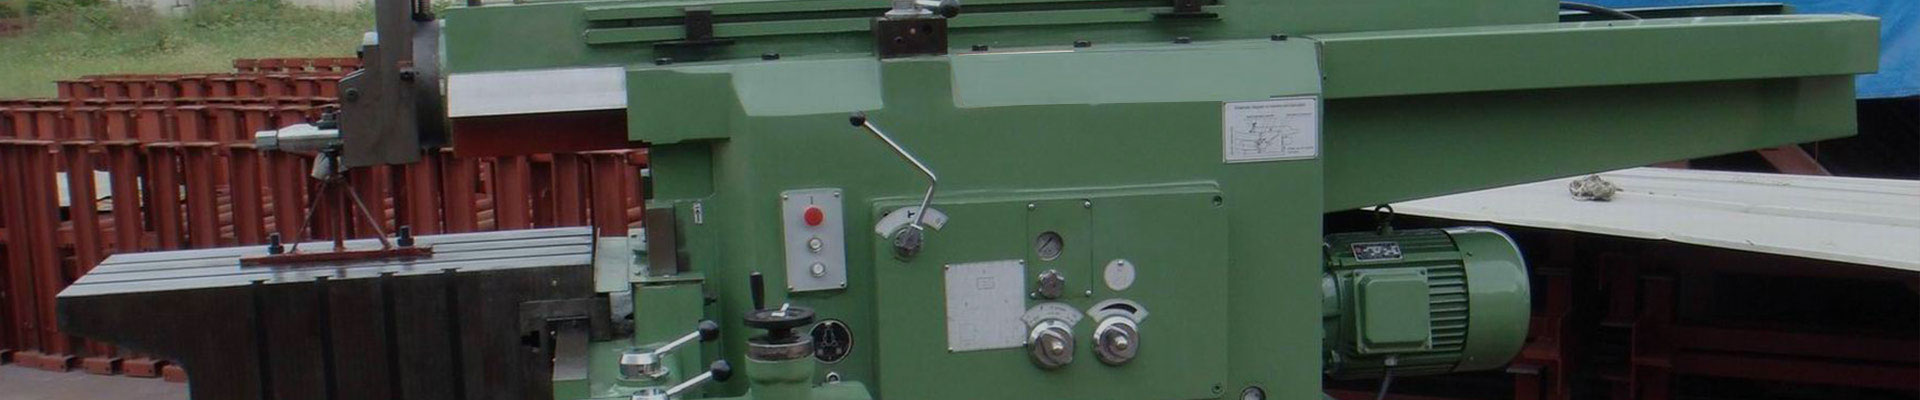 Shaping Machine Manufacturer and Suppliers in Kolkata, Howrah